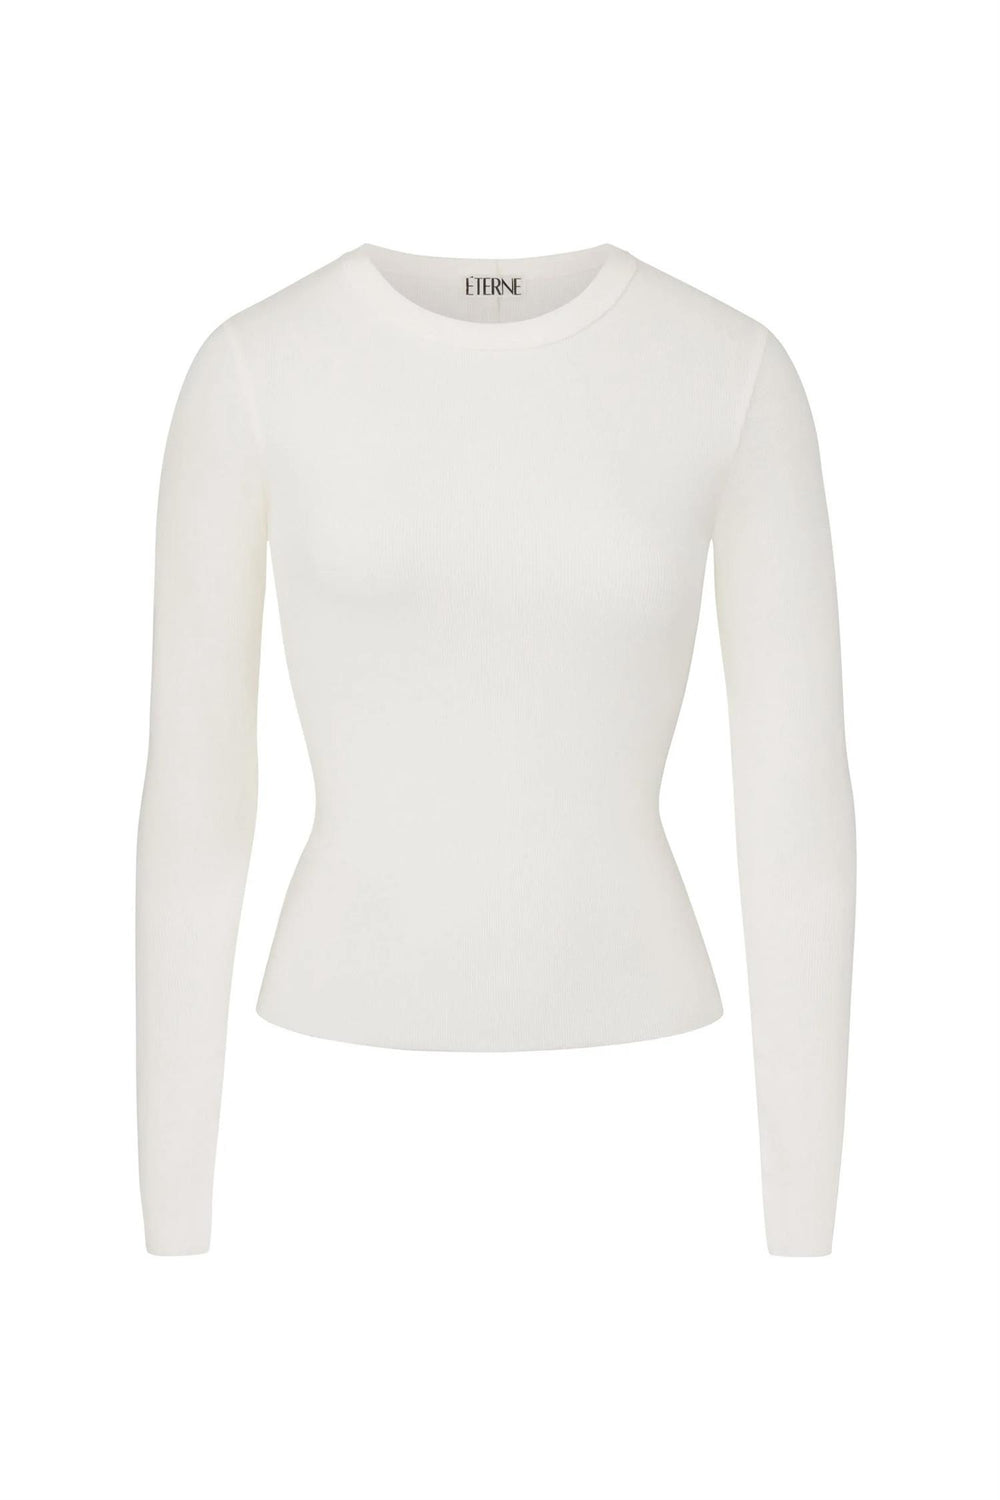 ETERNE - Long Sleeve Fitted Top Cream - Dale